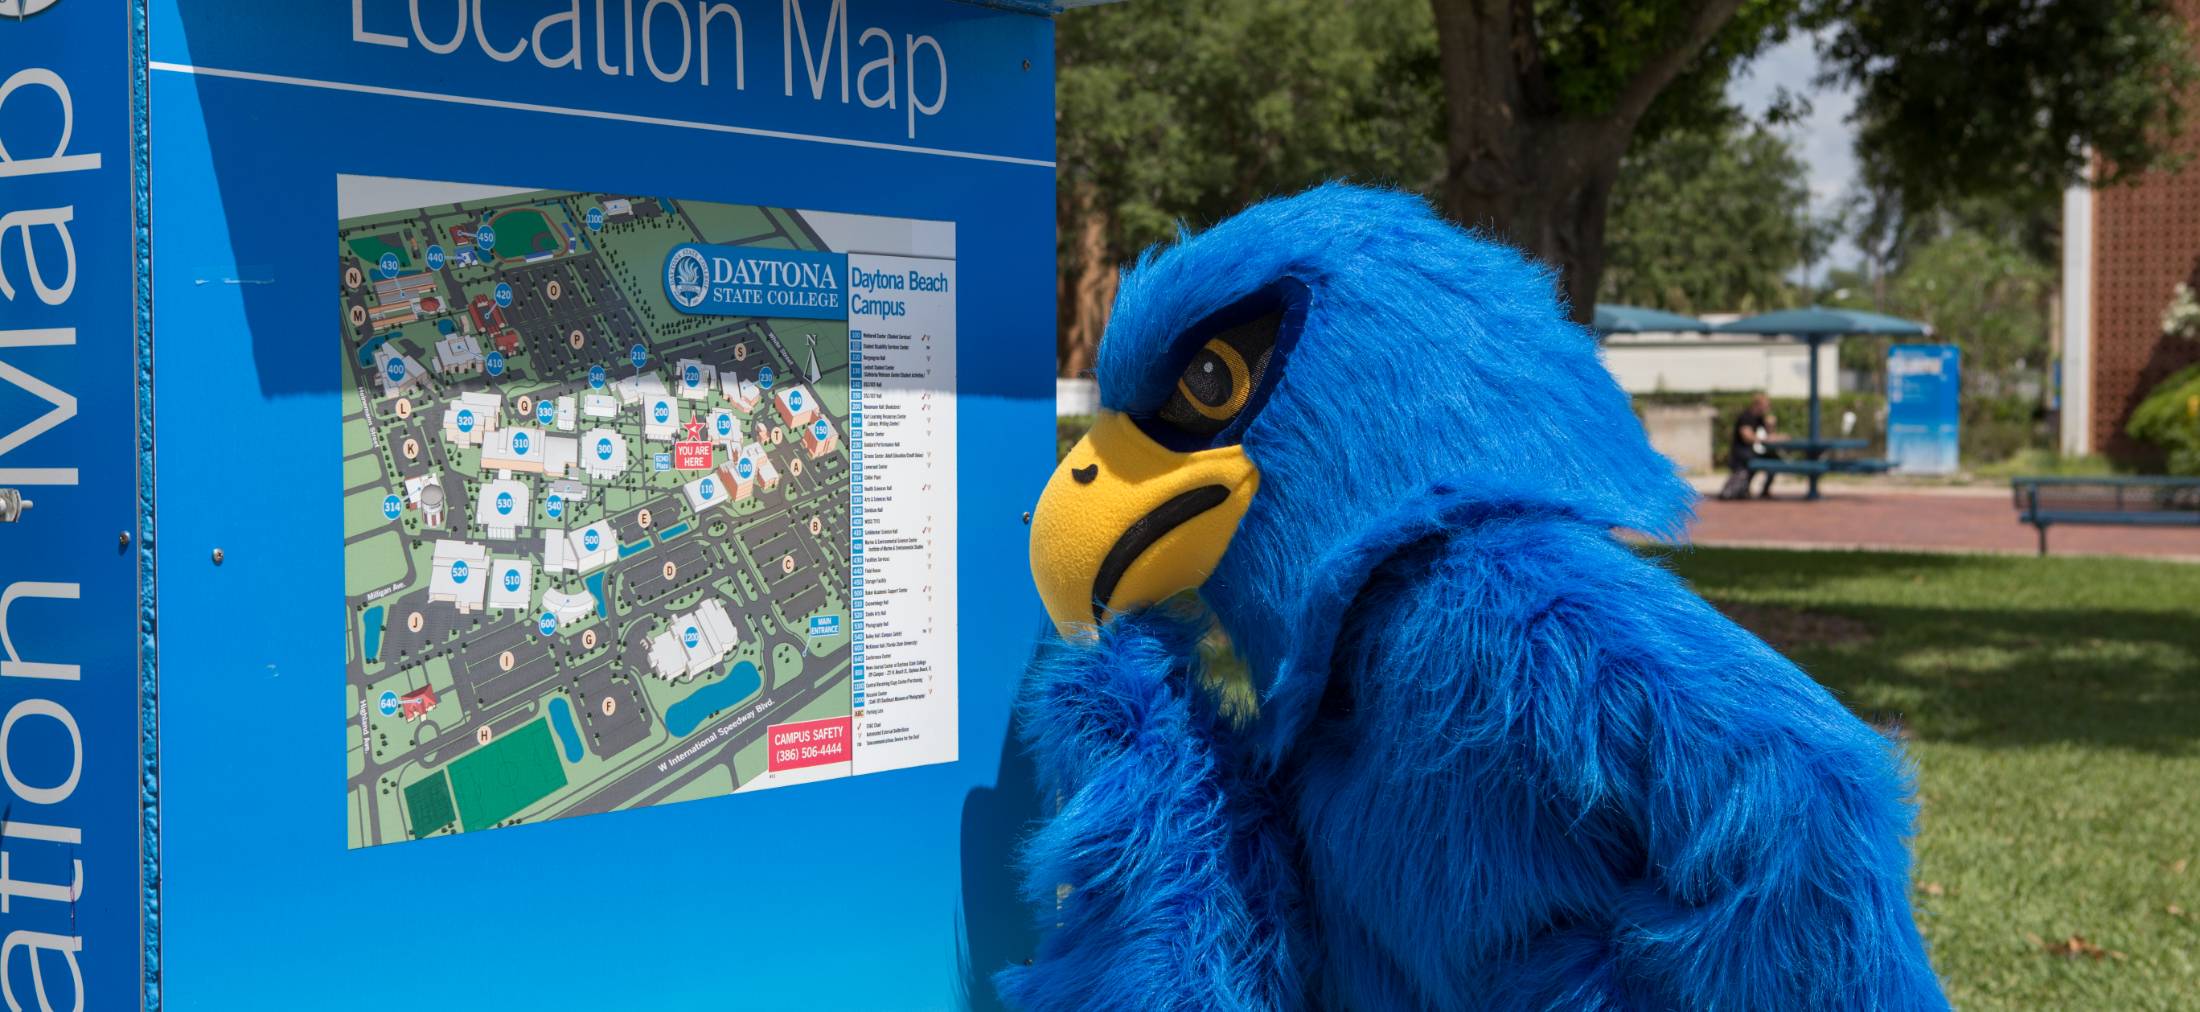 Freddie Falcon looking at a location map